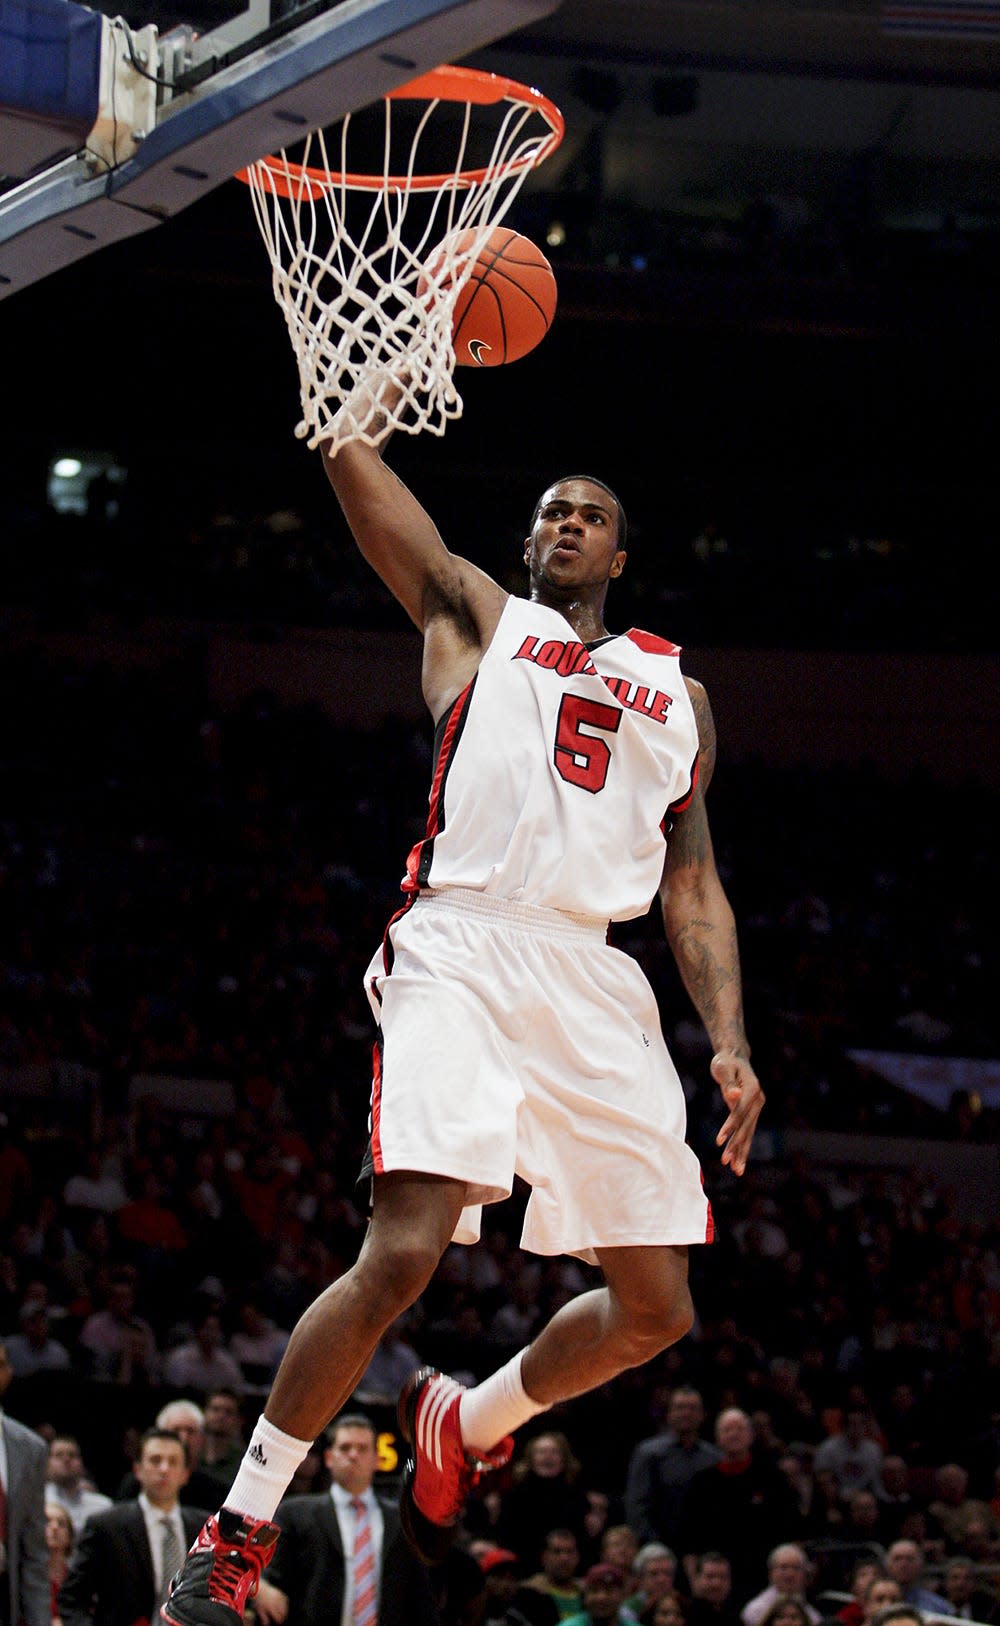 U of L's Earl Clark soars for a late dunk against Syracuse during the Big East Tournament in March 2009 at Madison Square Garden.